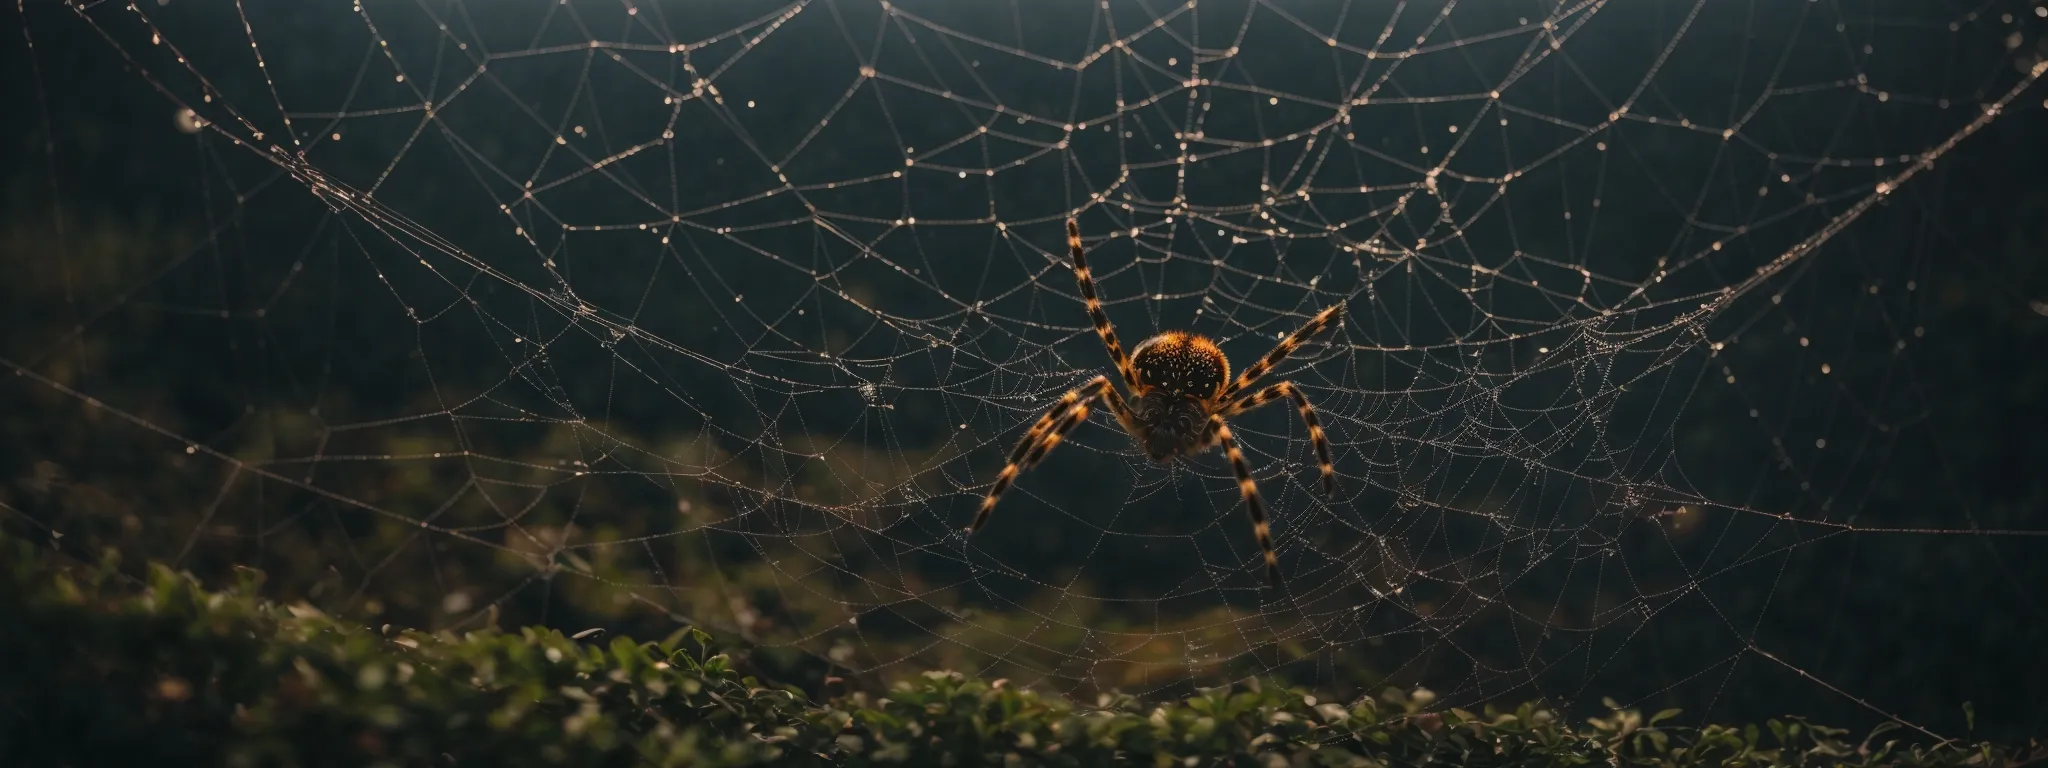 a spider weaves an intricate web with multiple pathways converging at a central node, symbolizing an organized network of links.